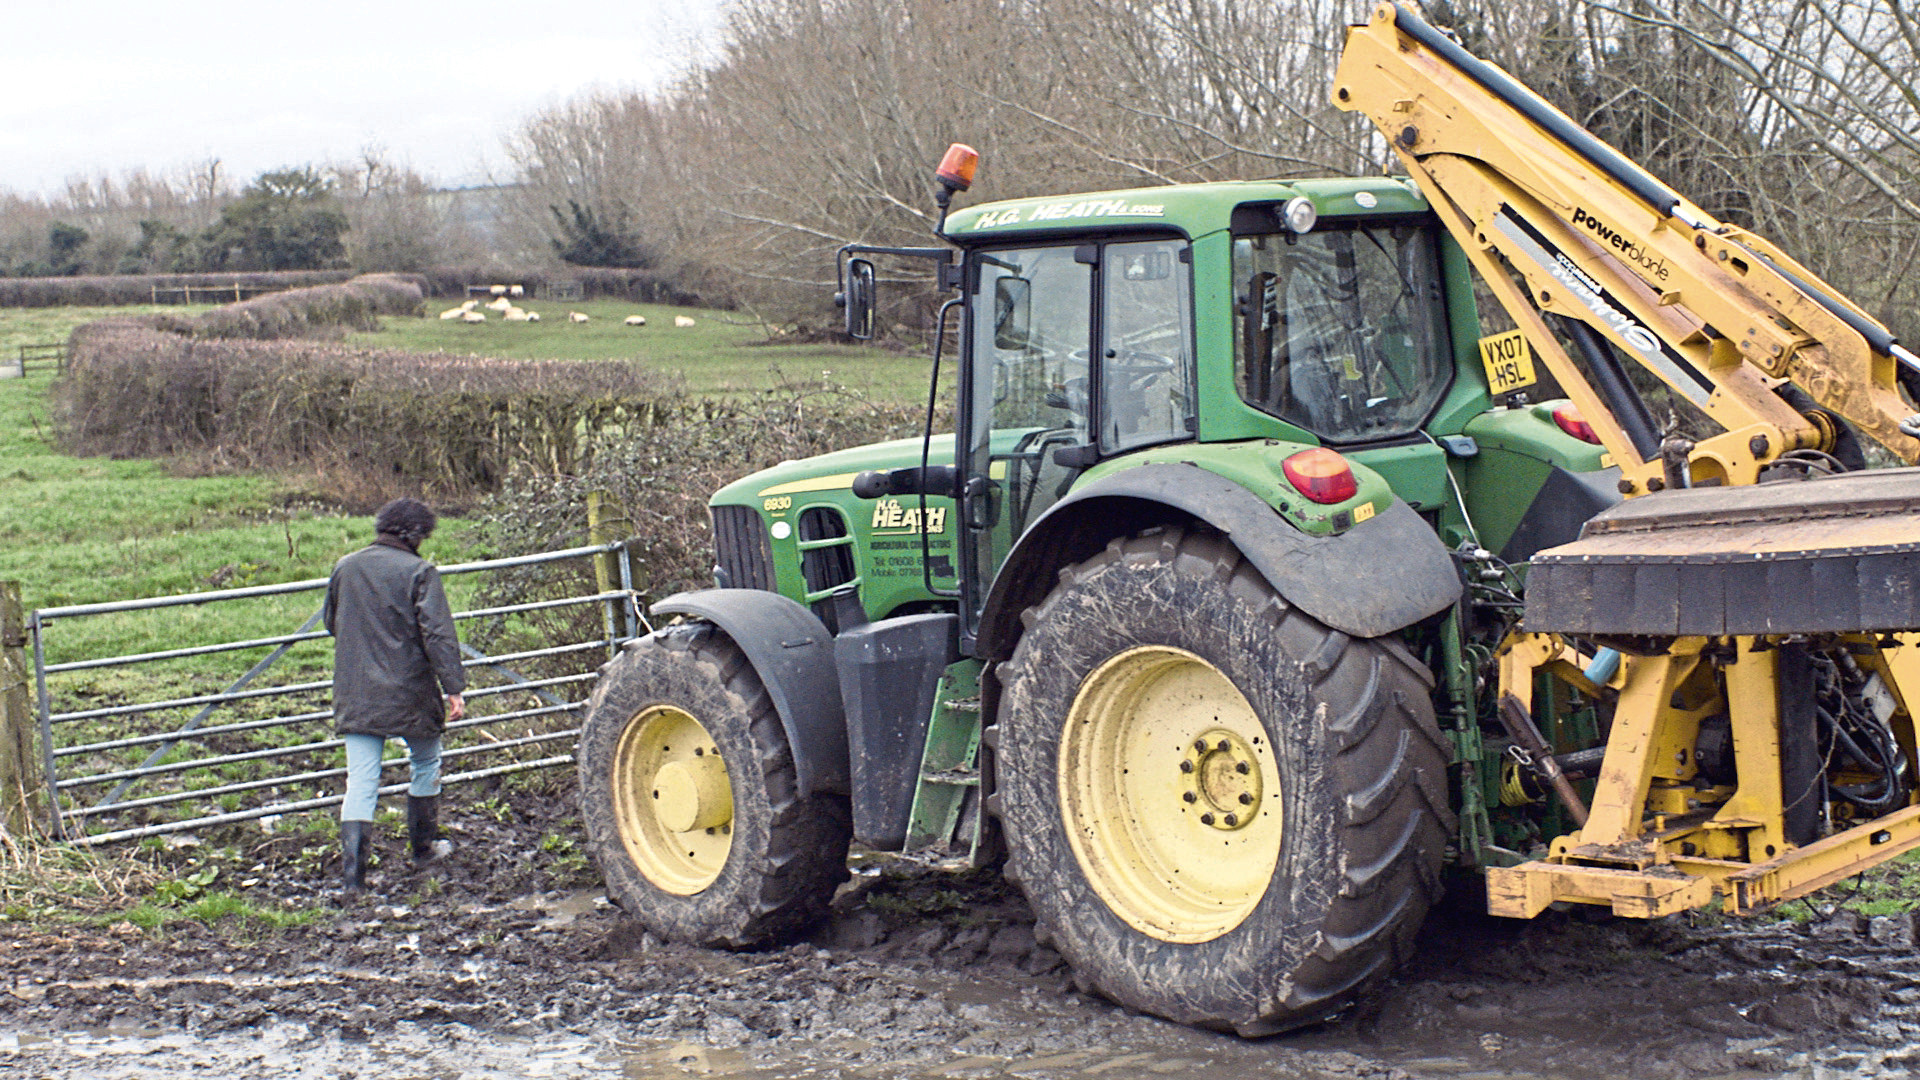 The farming industry has a poor safety record.